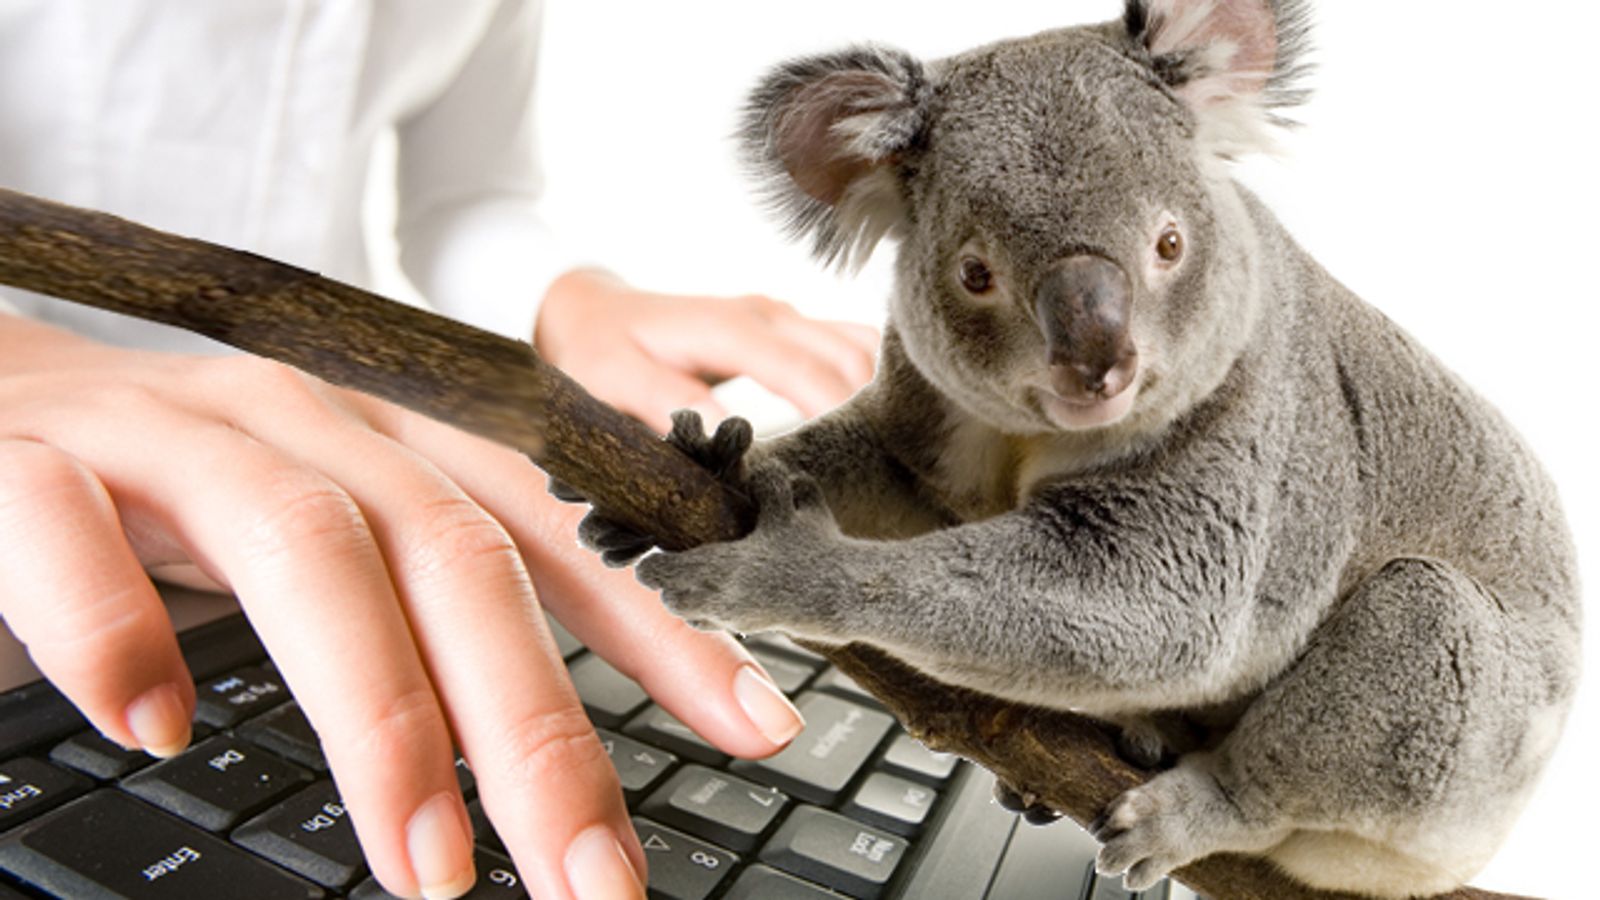 Aussie Web Agency Changes its Tune